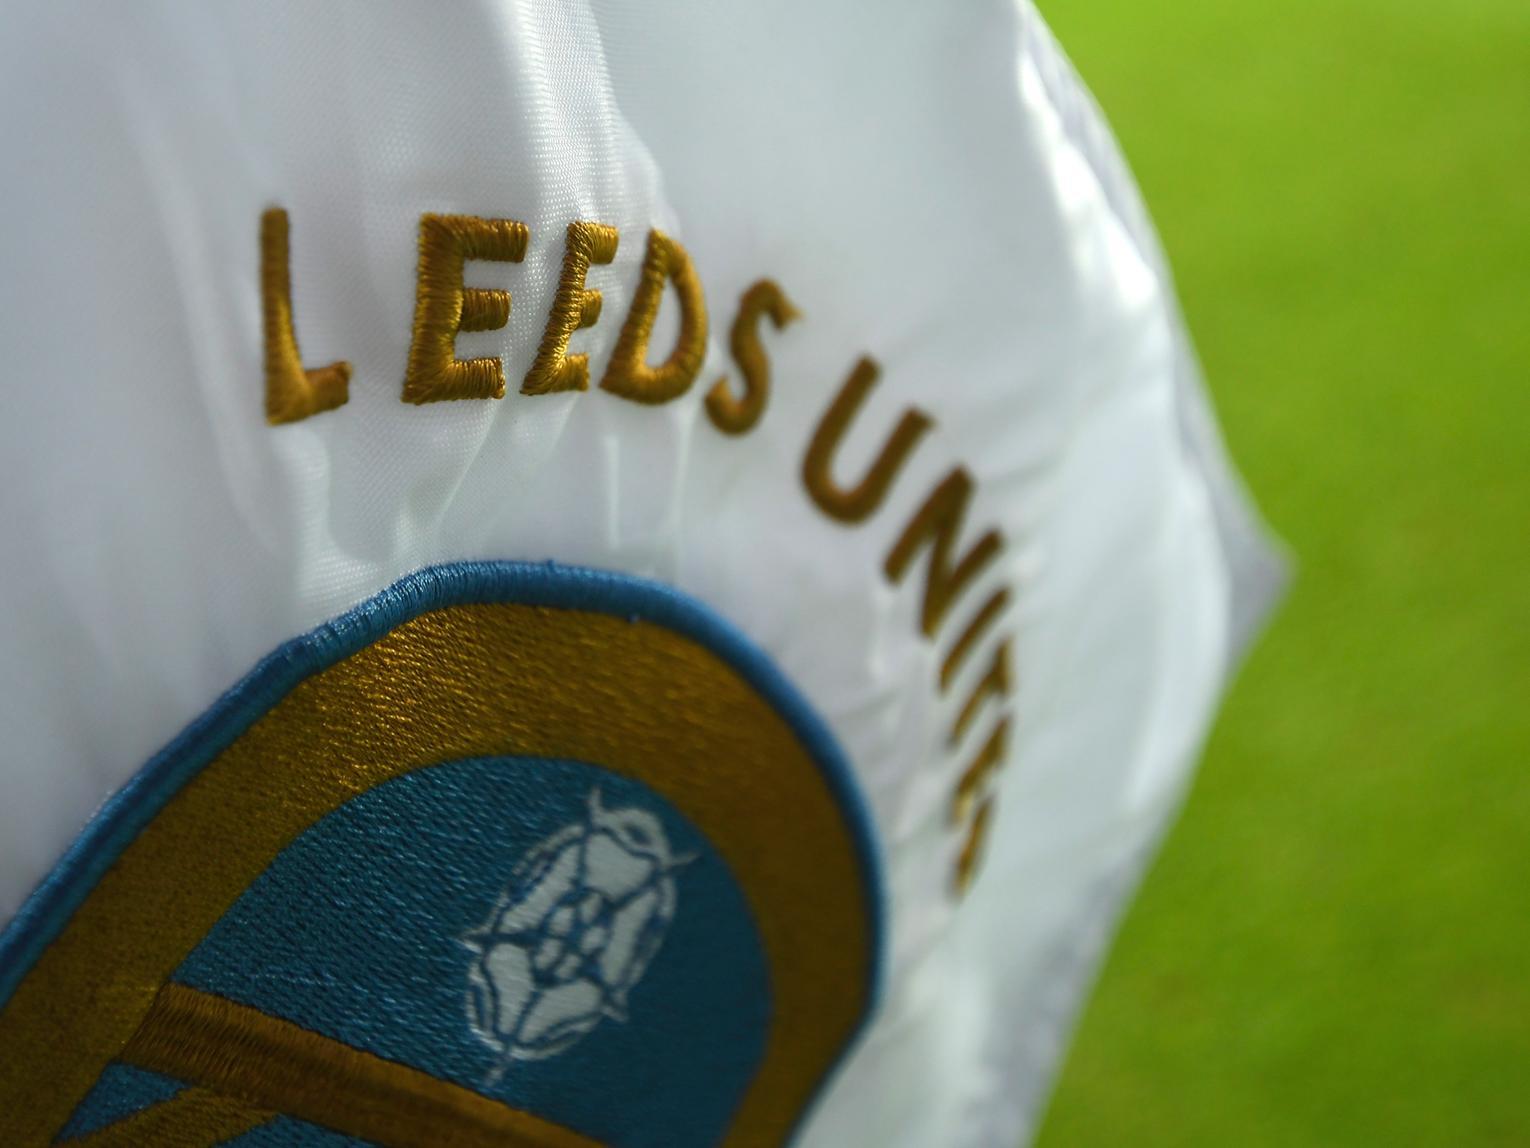 Sky Sports Gary Weaver has claimed Leeds United are in talks with three clubs over signing a striker. (Various)